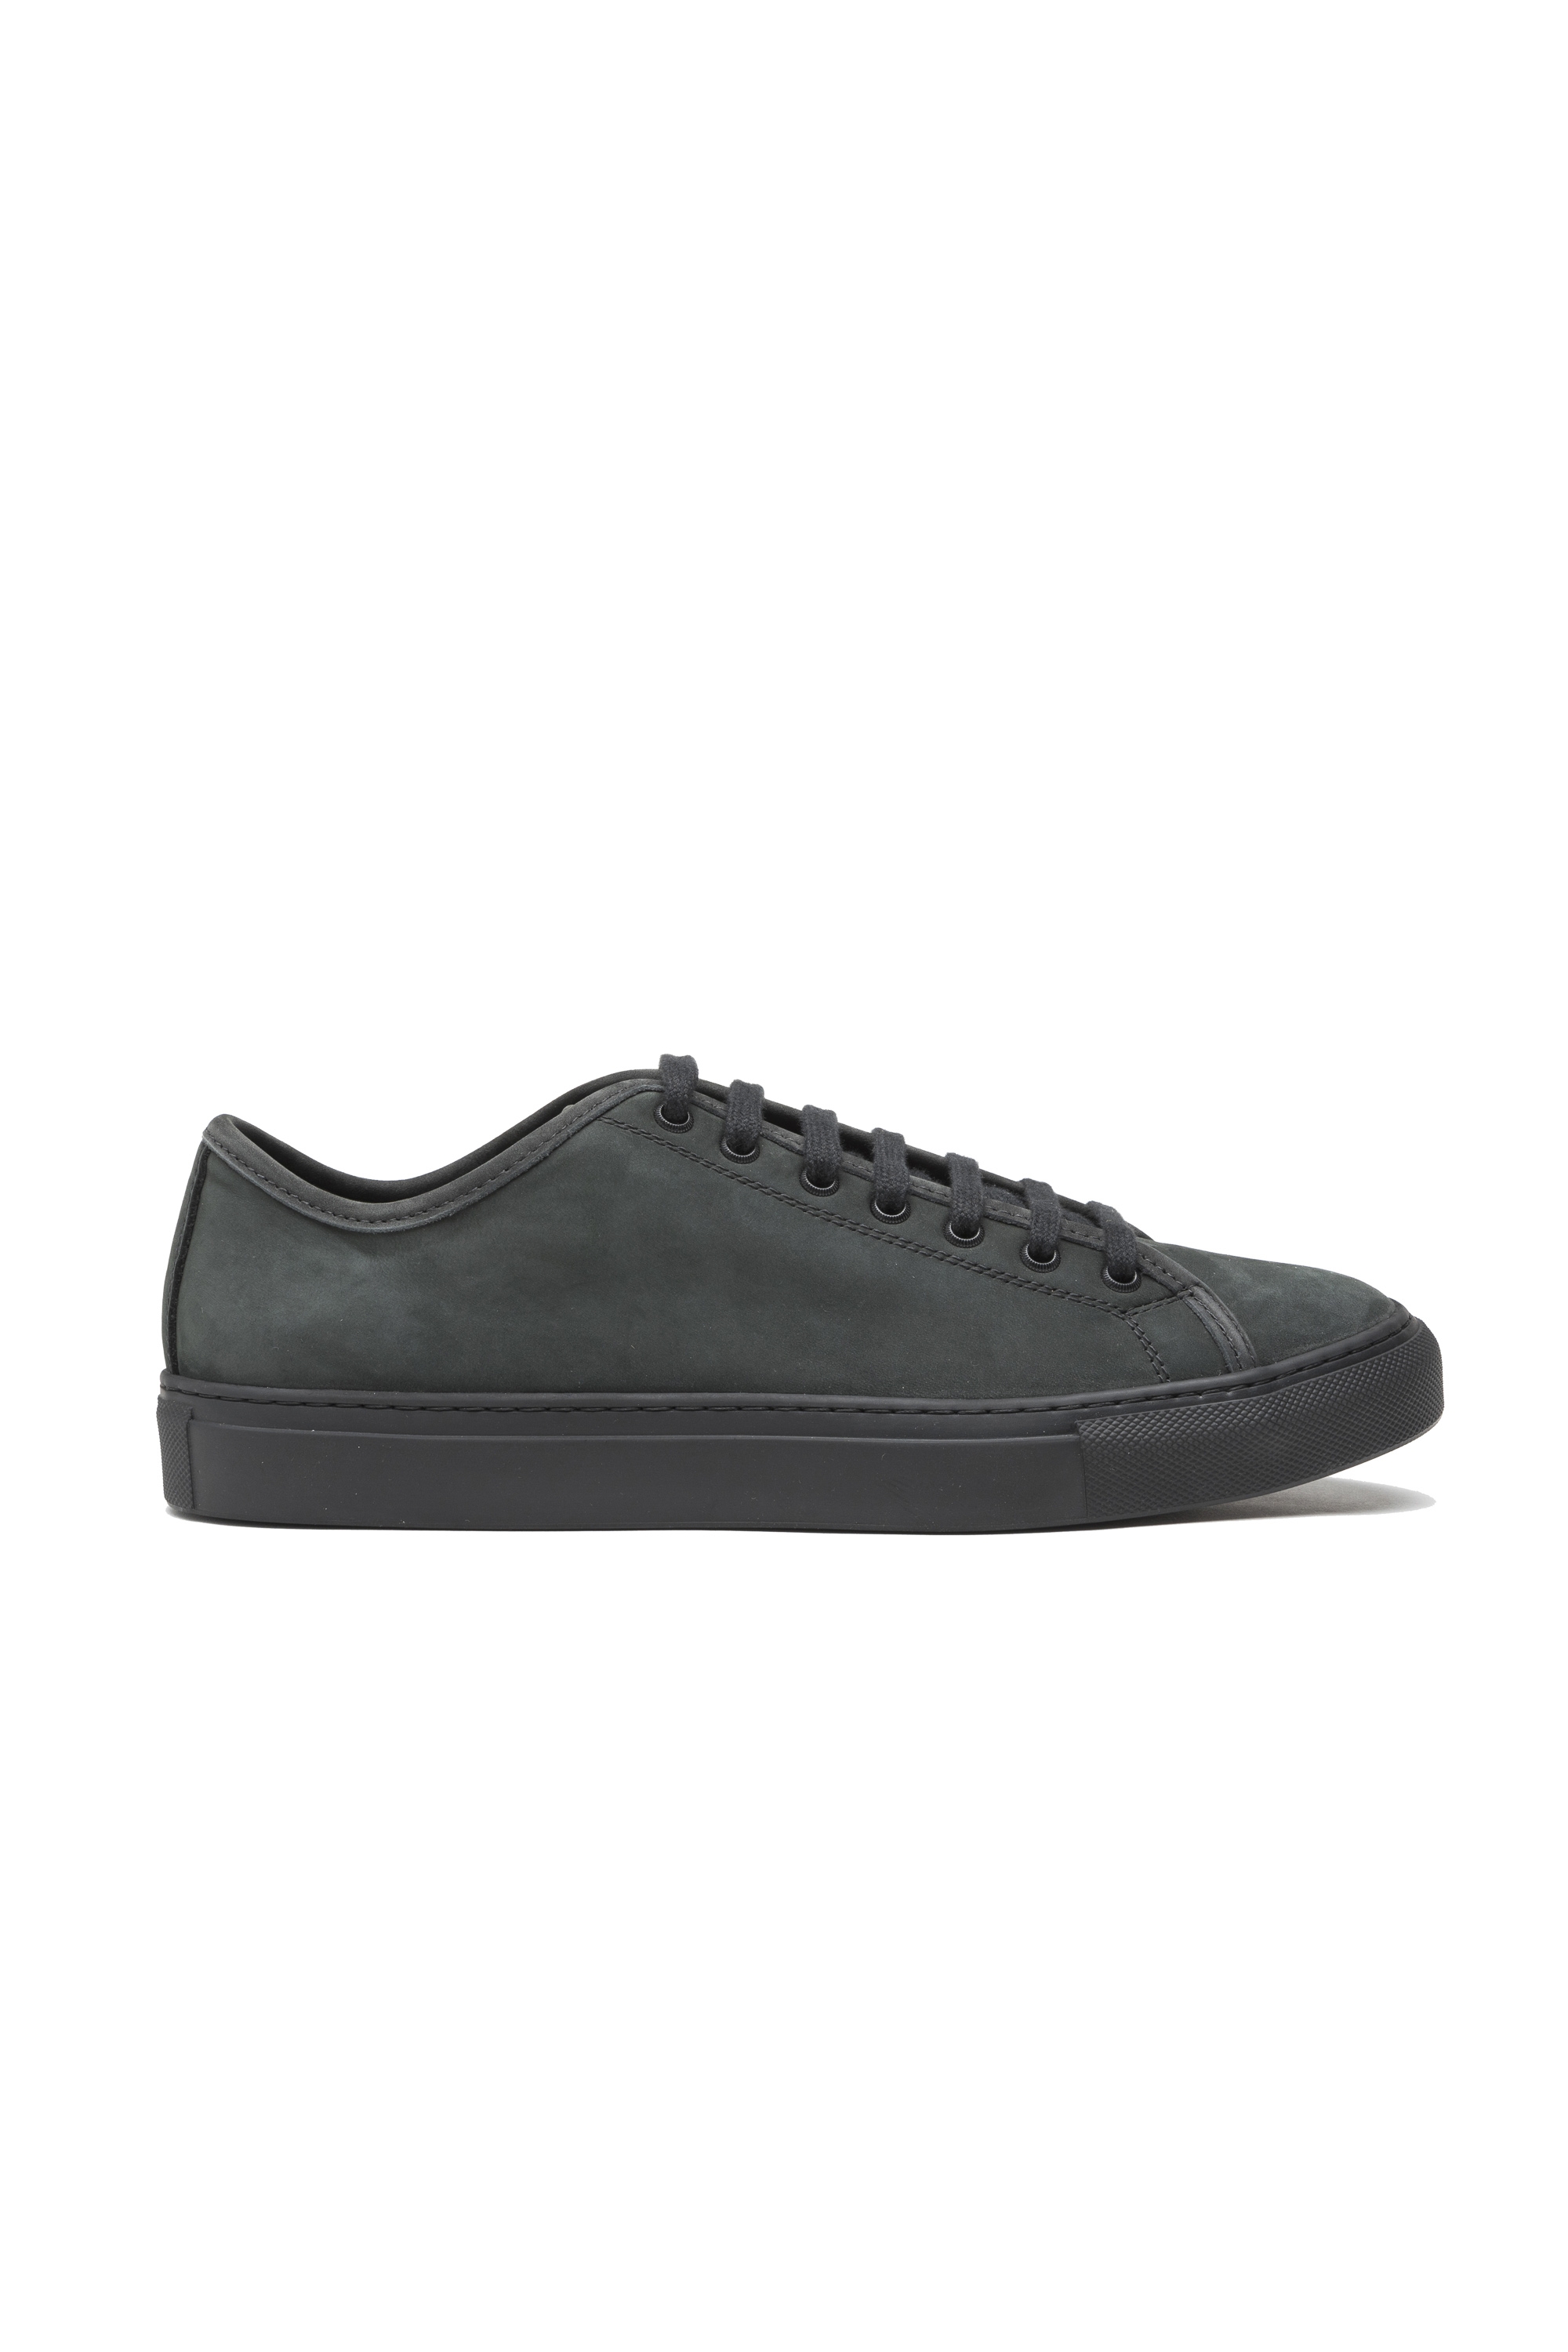 SBU 04680_23AW Classic lace up sneakers in anthracite grey nubuk leather 01